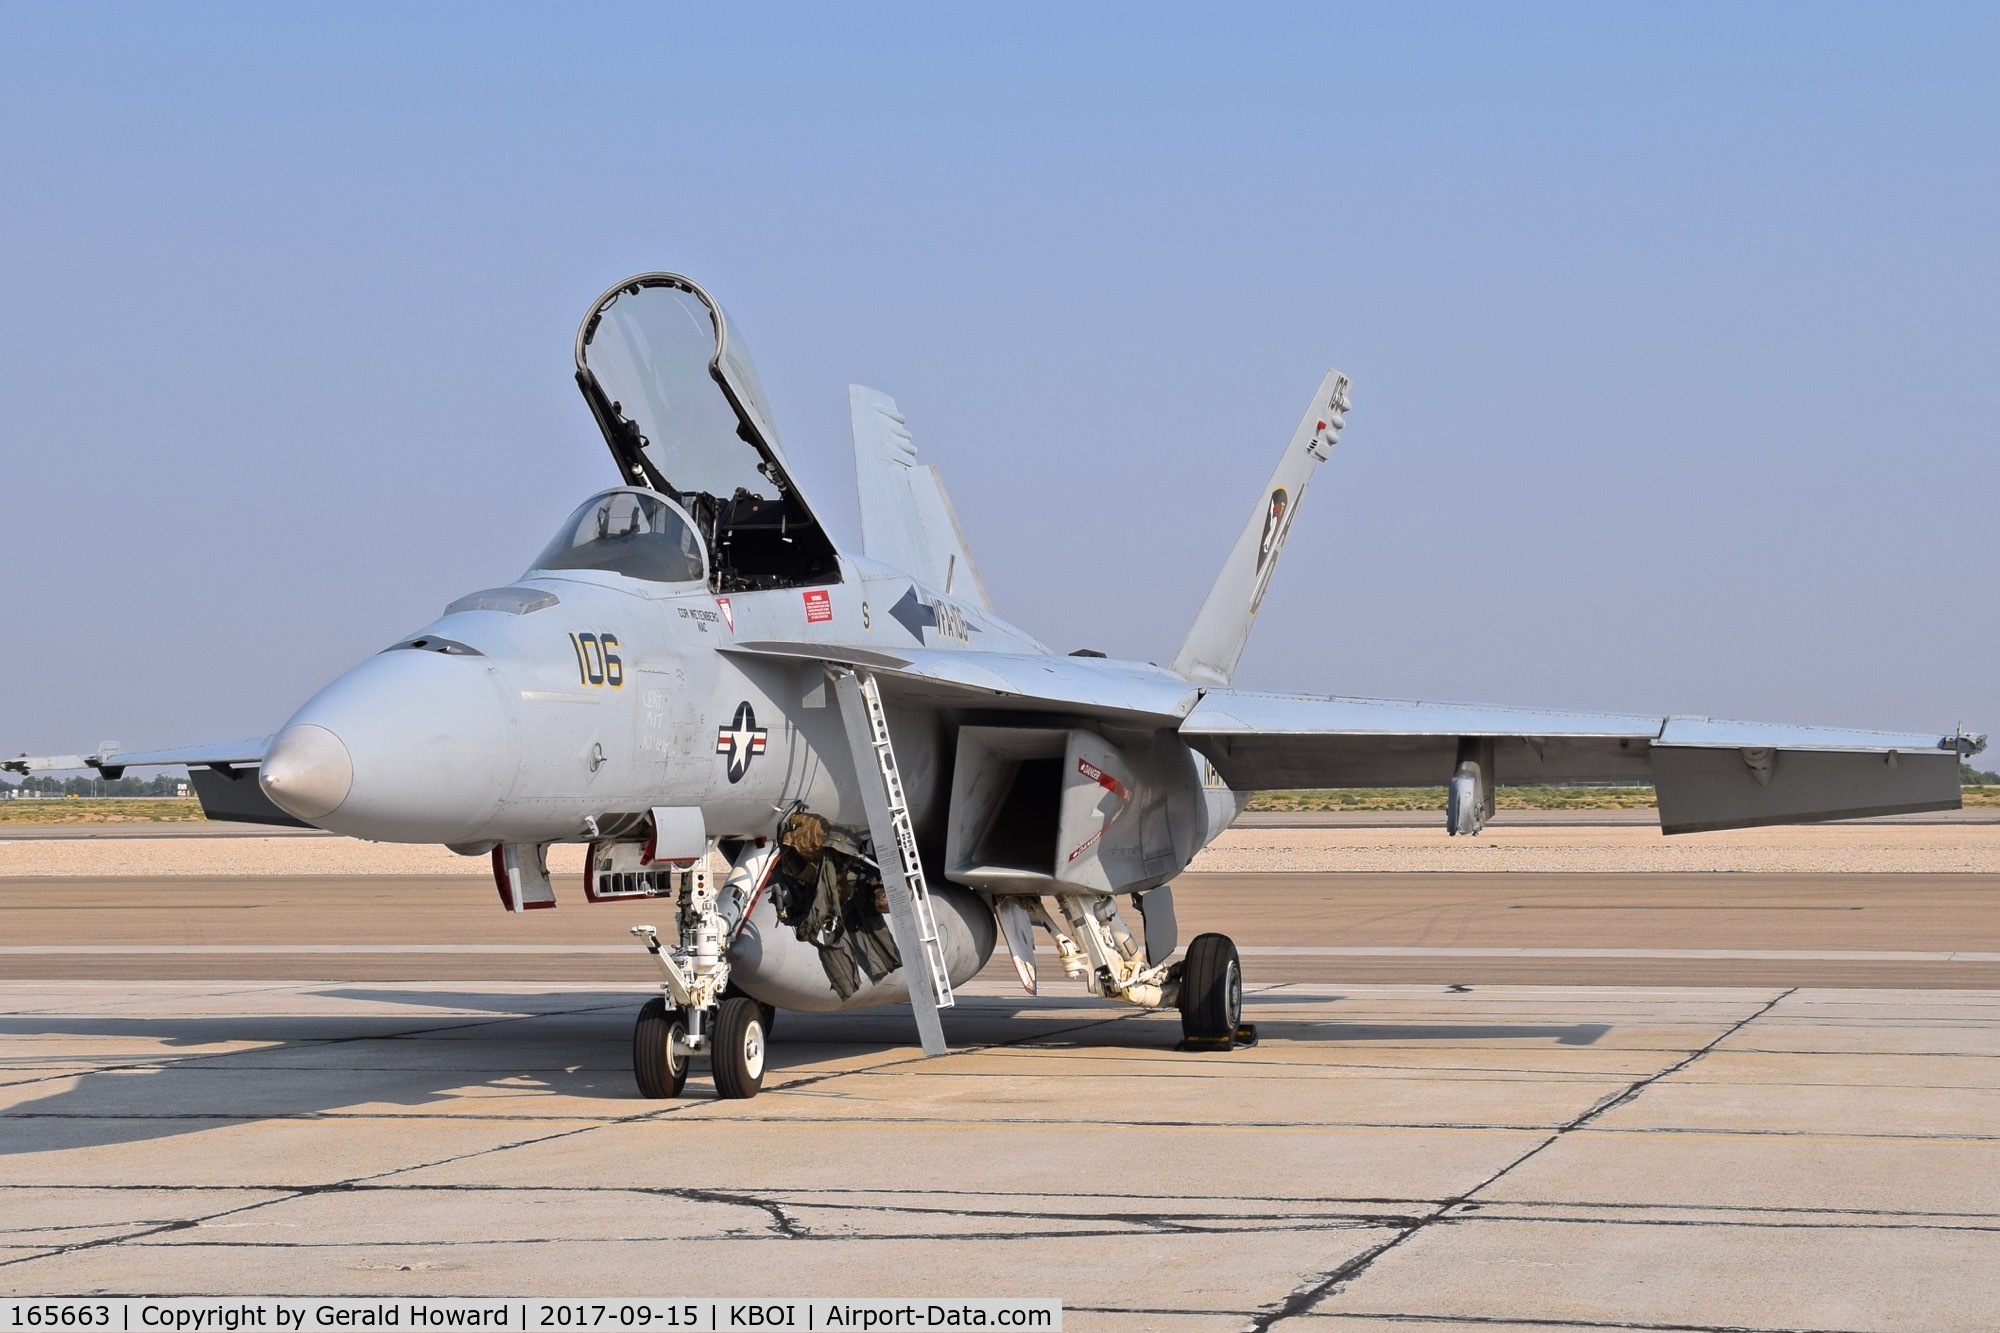 165663, Boeing F/A-18E Super Hornet C/N 1509/E017, Parked on the South GA ramp.  VFA-106 